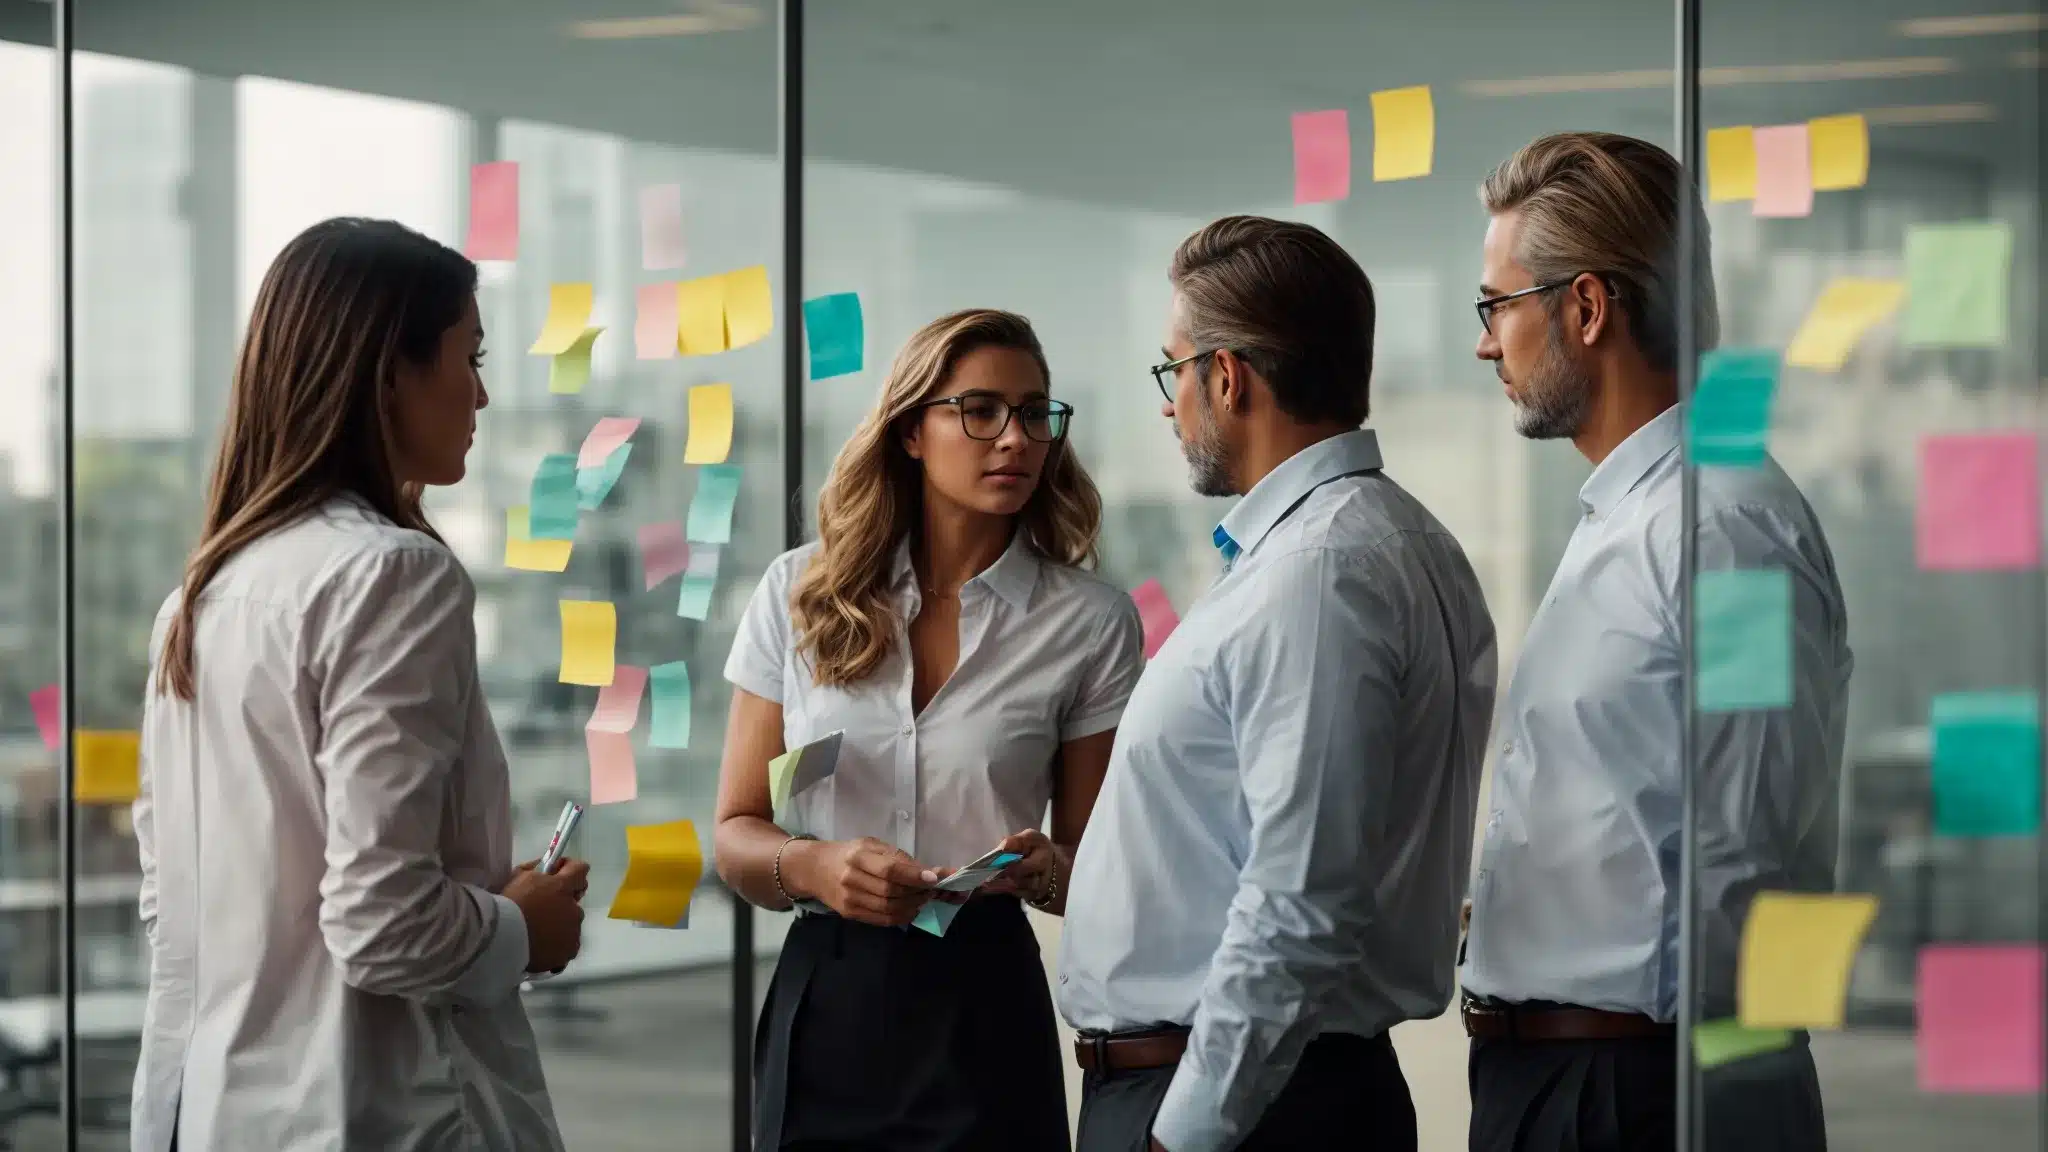 Executives Brainstorming Over A Transparent Glass Board With Colorful Sticky Notes Outlining Brand-Related Concepts.